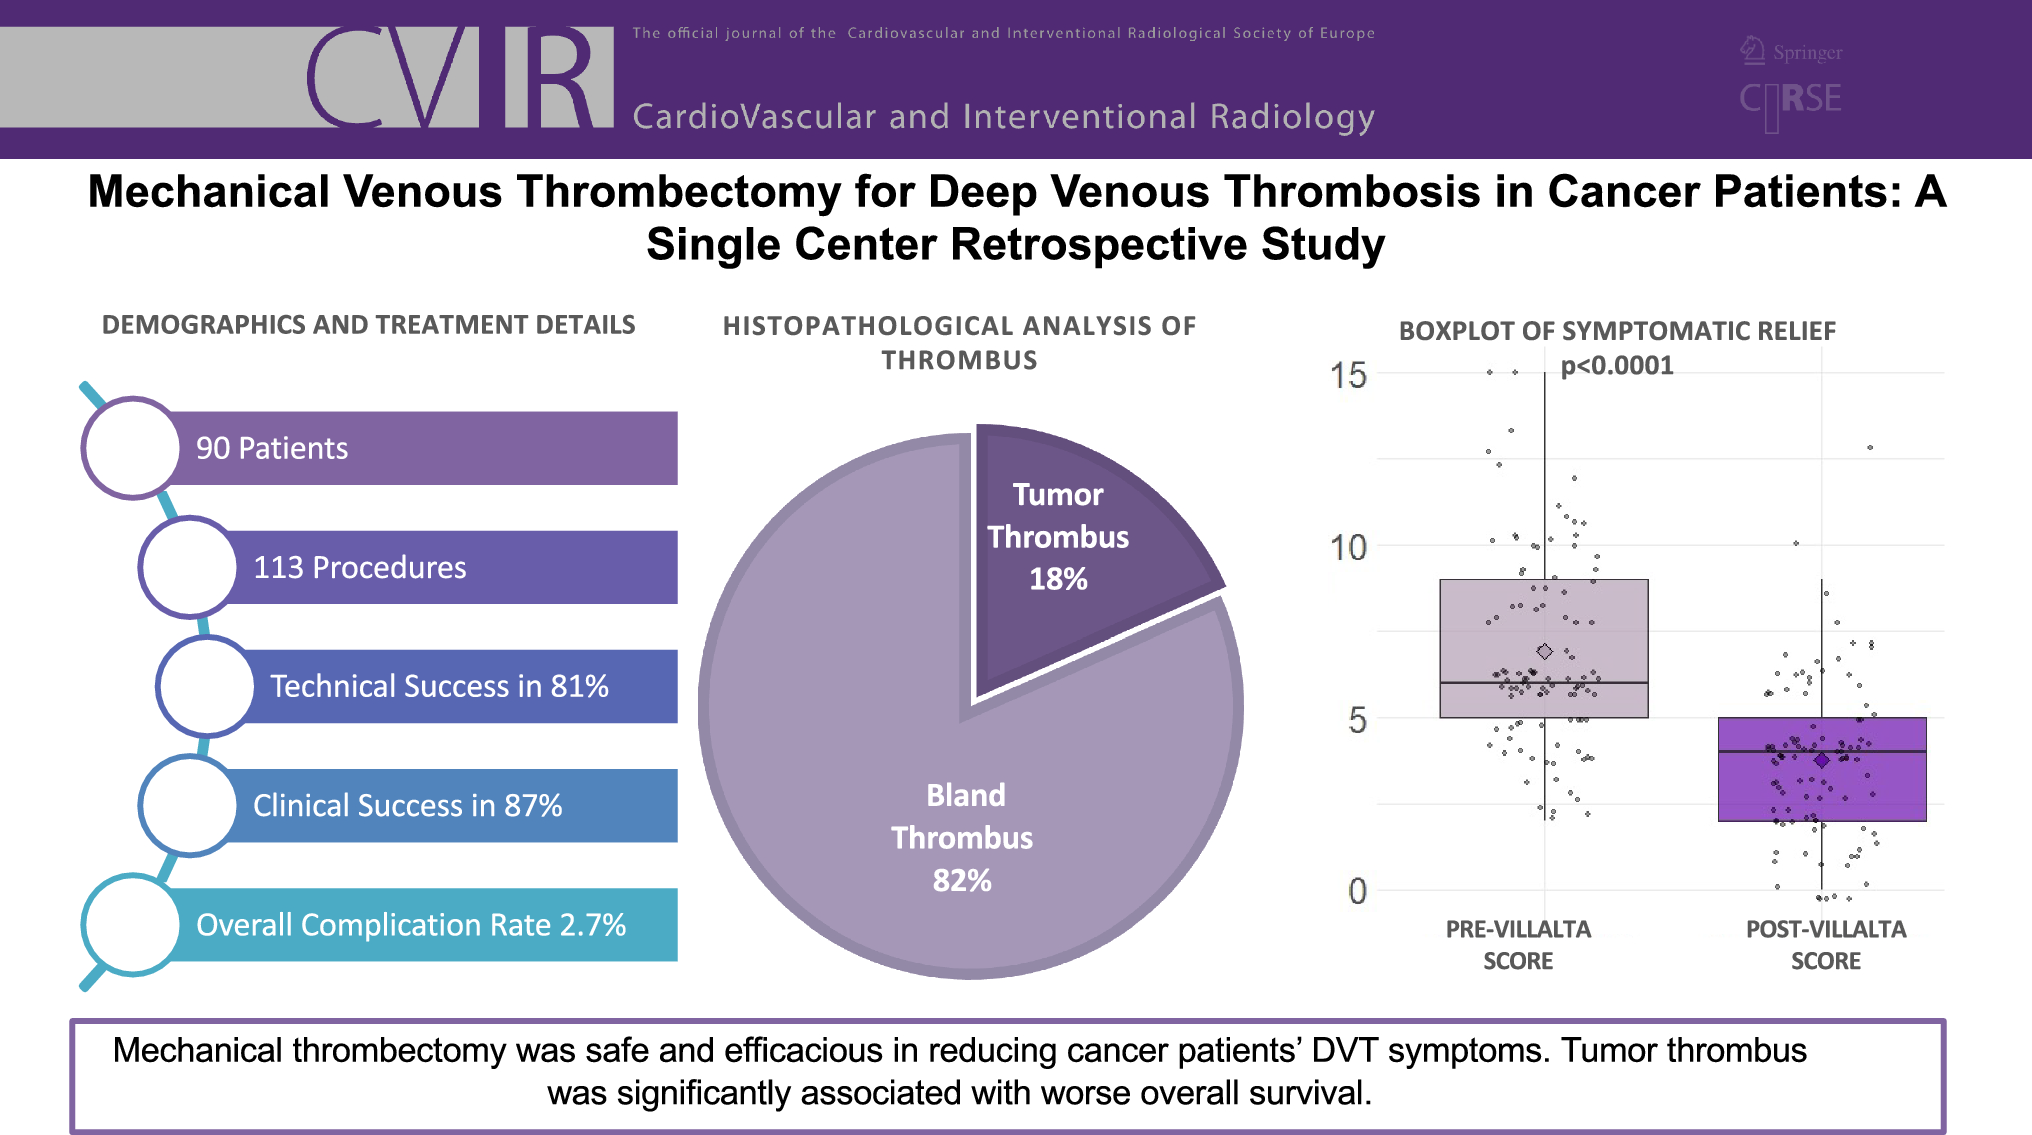 Mechanical Venous Thrombectomy for Deep Venous Thrombosis in Cancer Patients: A Single-Center Retrospective Study